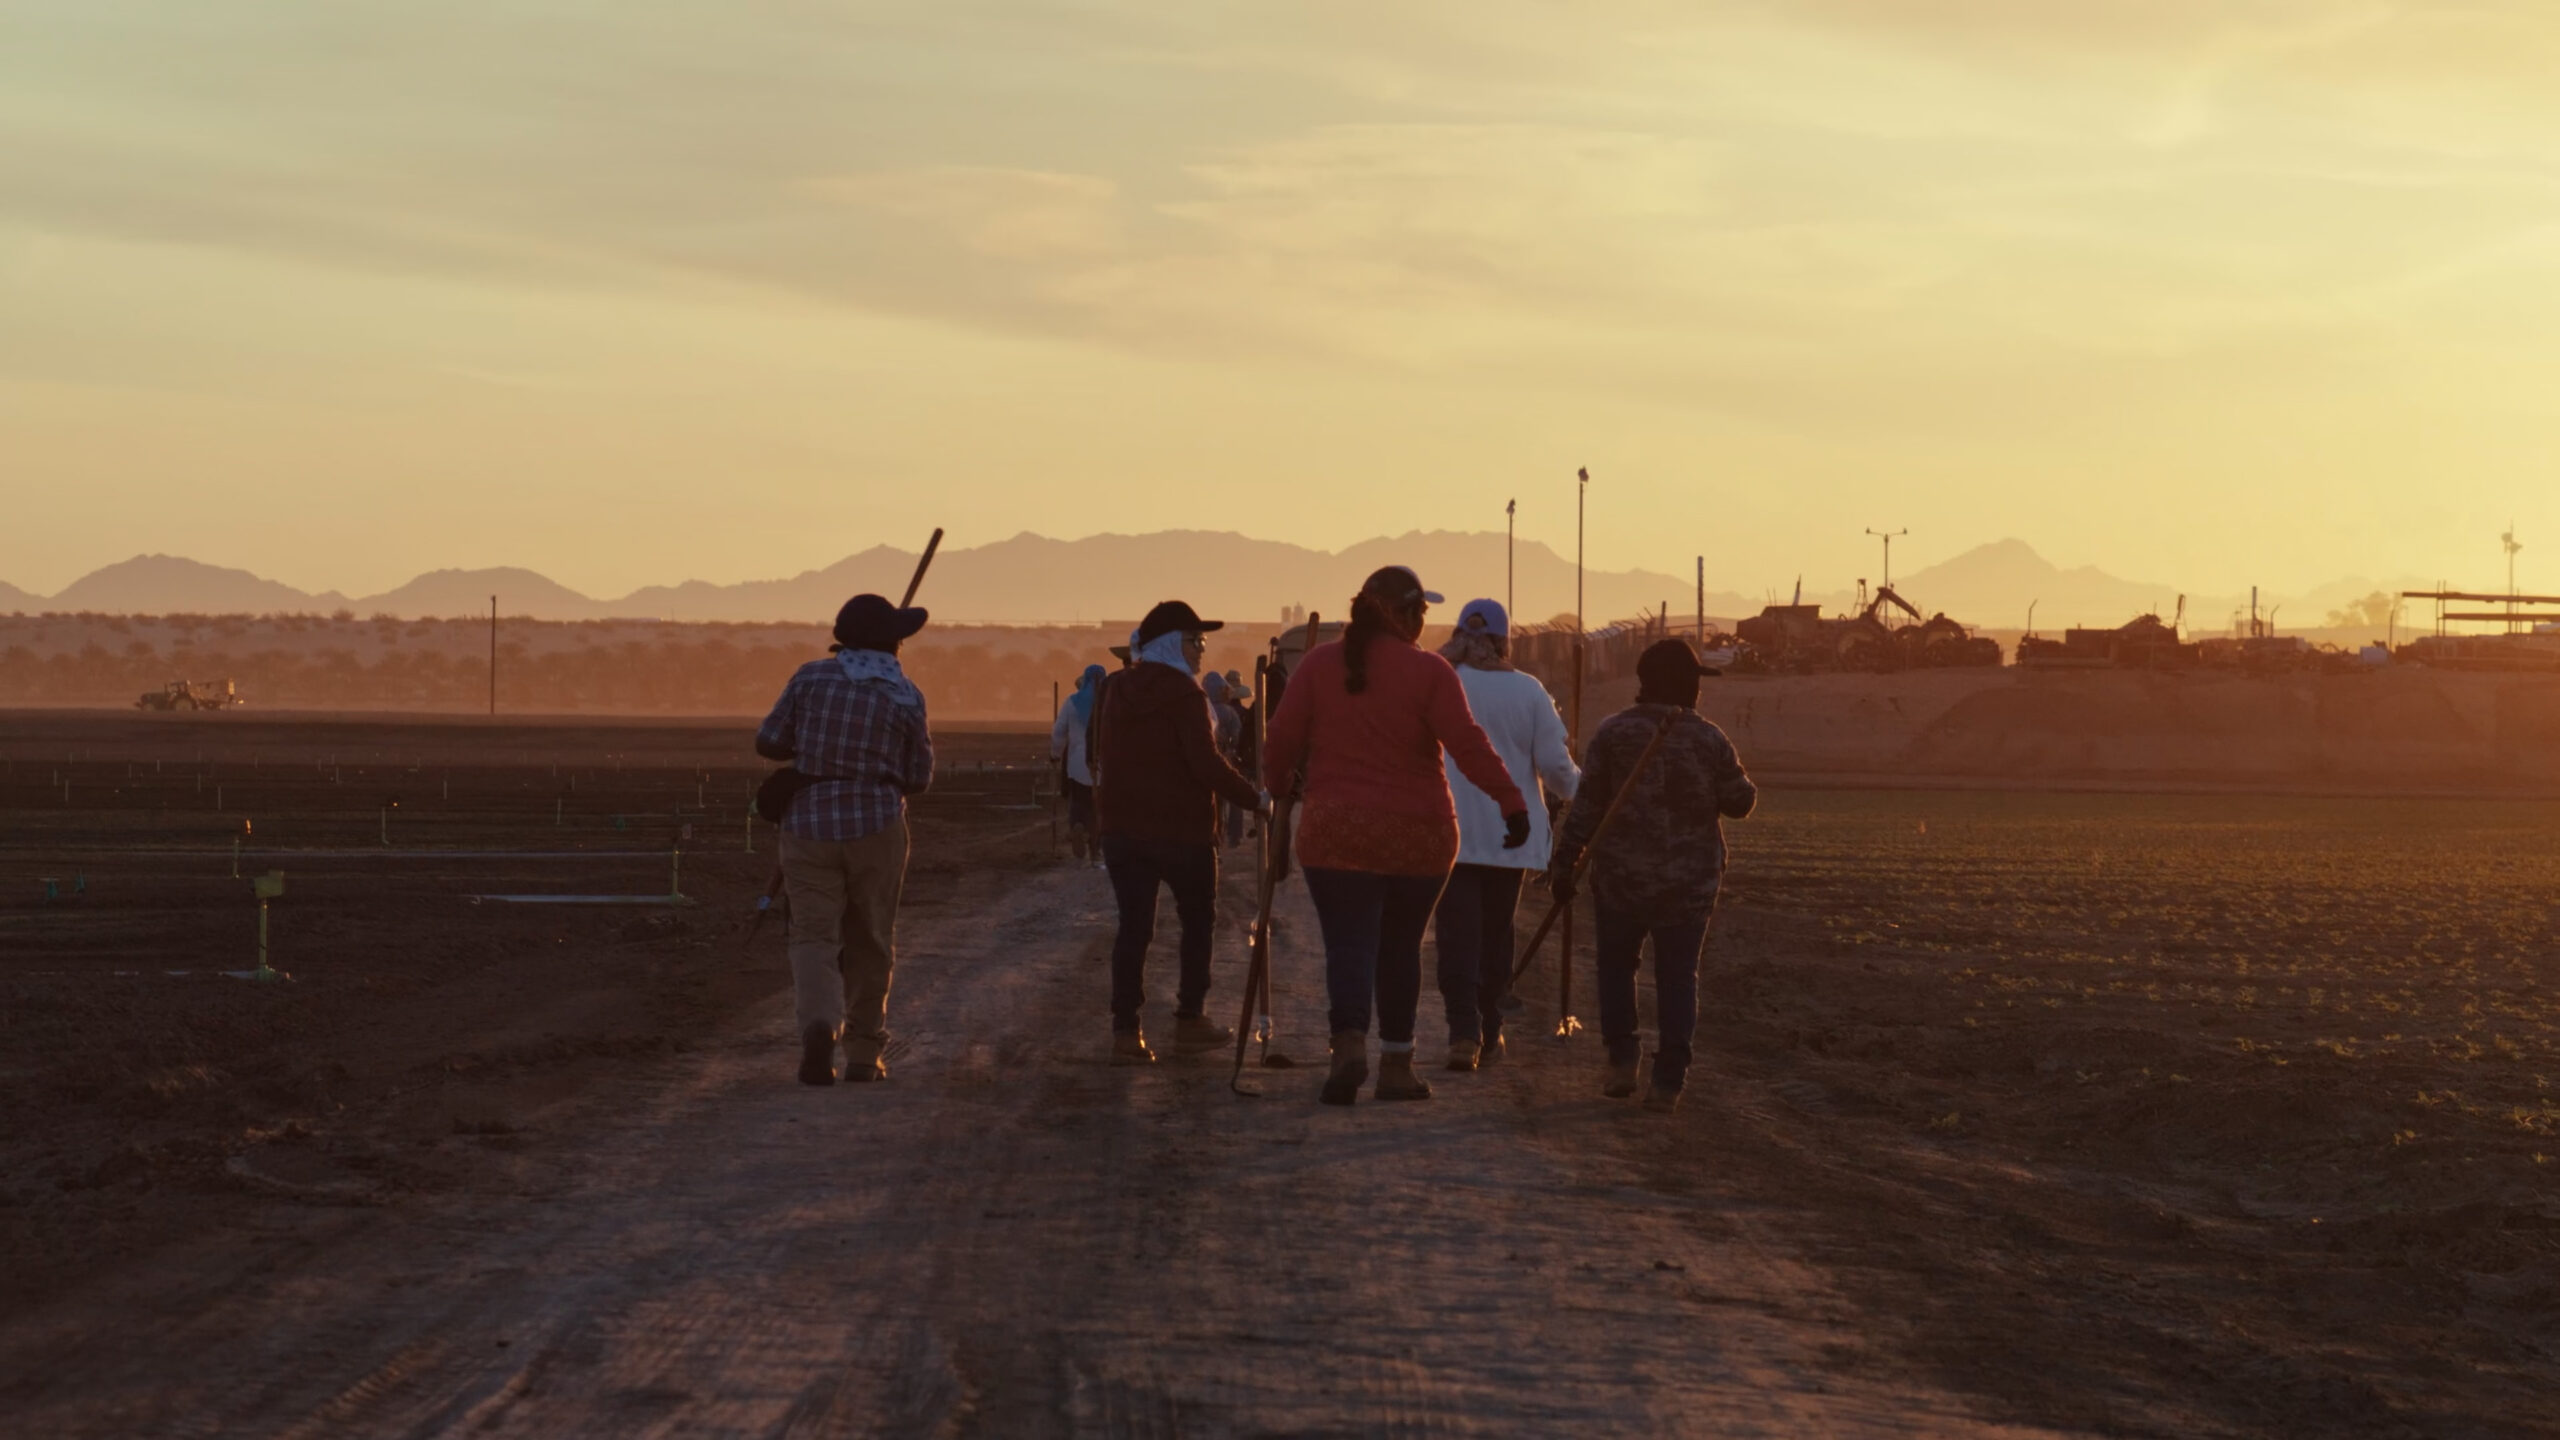 A group of farm workers walking down a dirt road with tools in hand, as the sun sets over the agricultural field, casting a warm golden glow across the landscape.